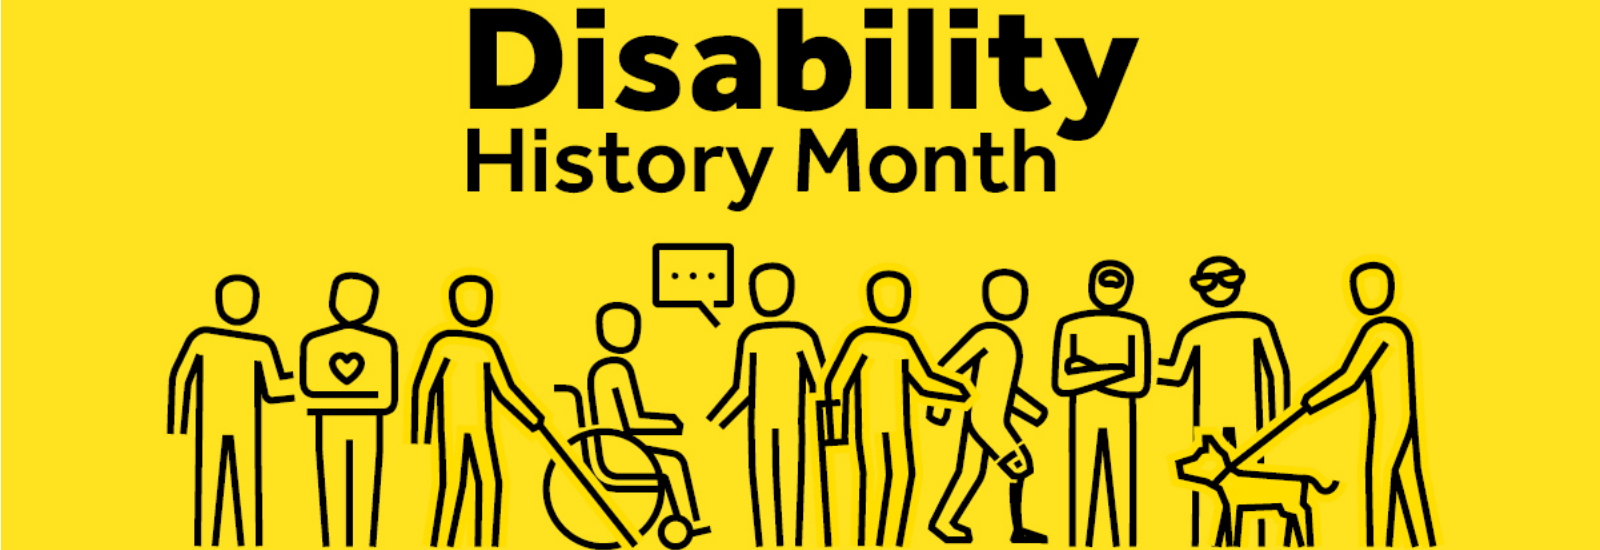 Disability History Month banner